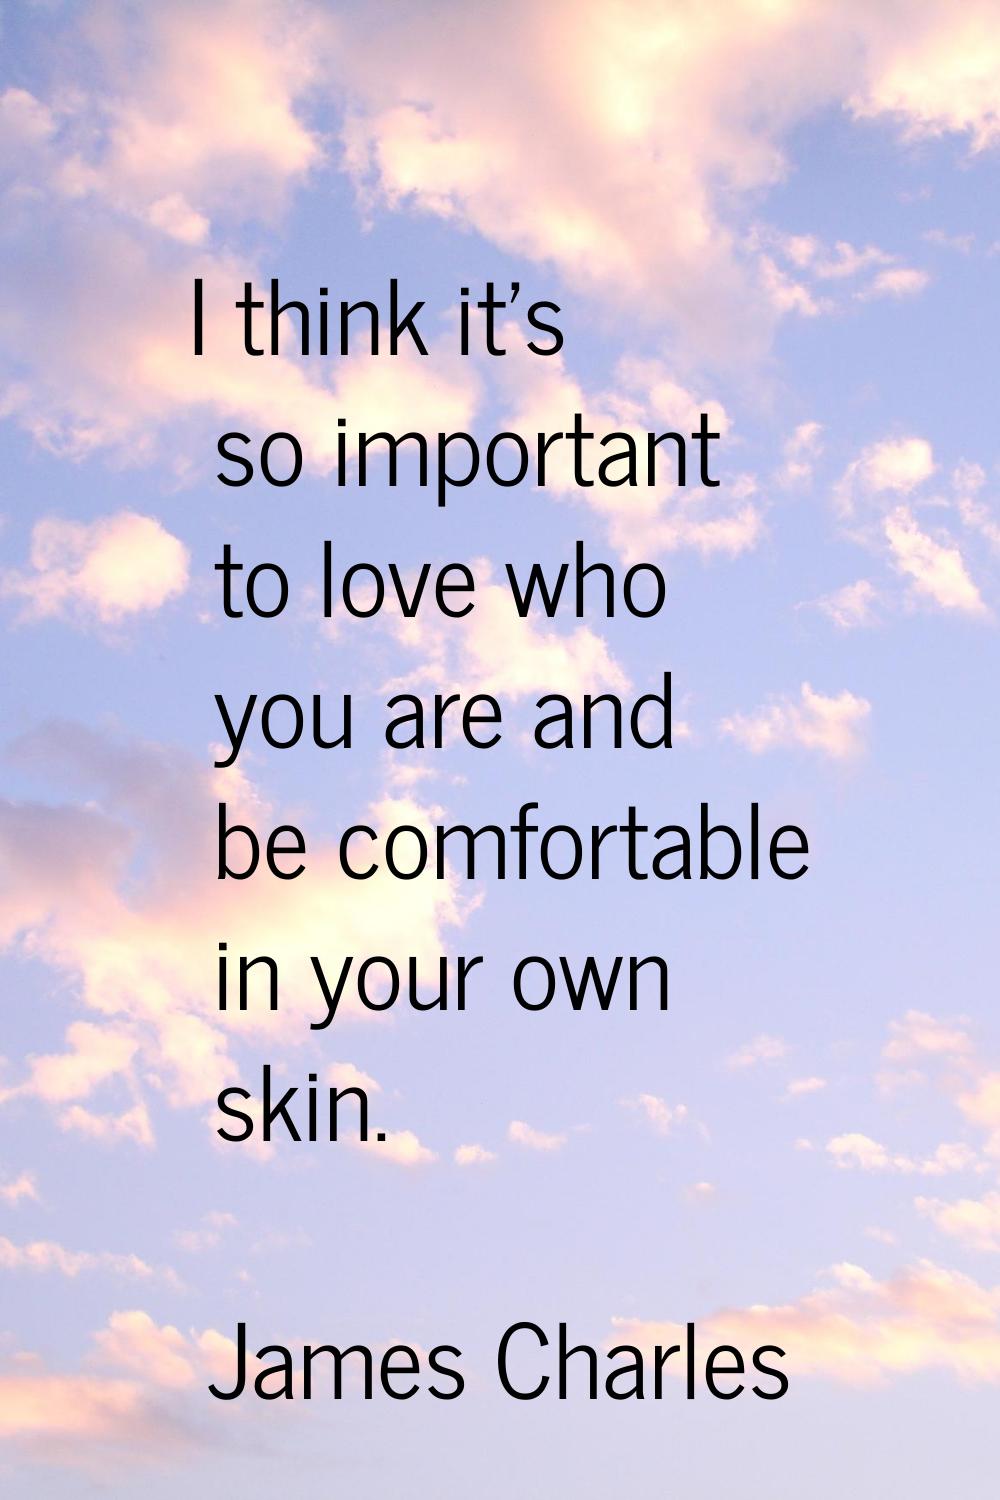 I think it's so important to love who you are and be comfortable in your own skin.